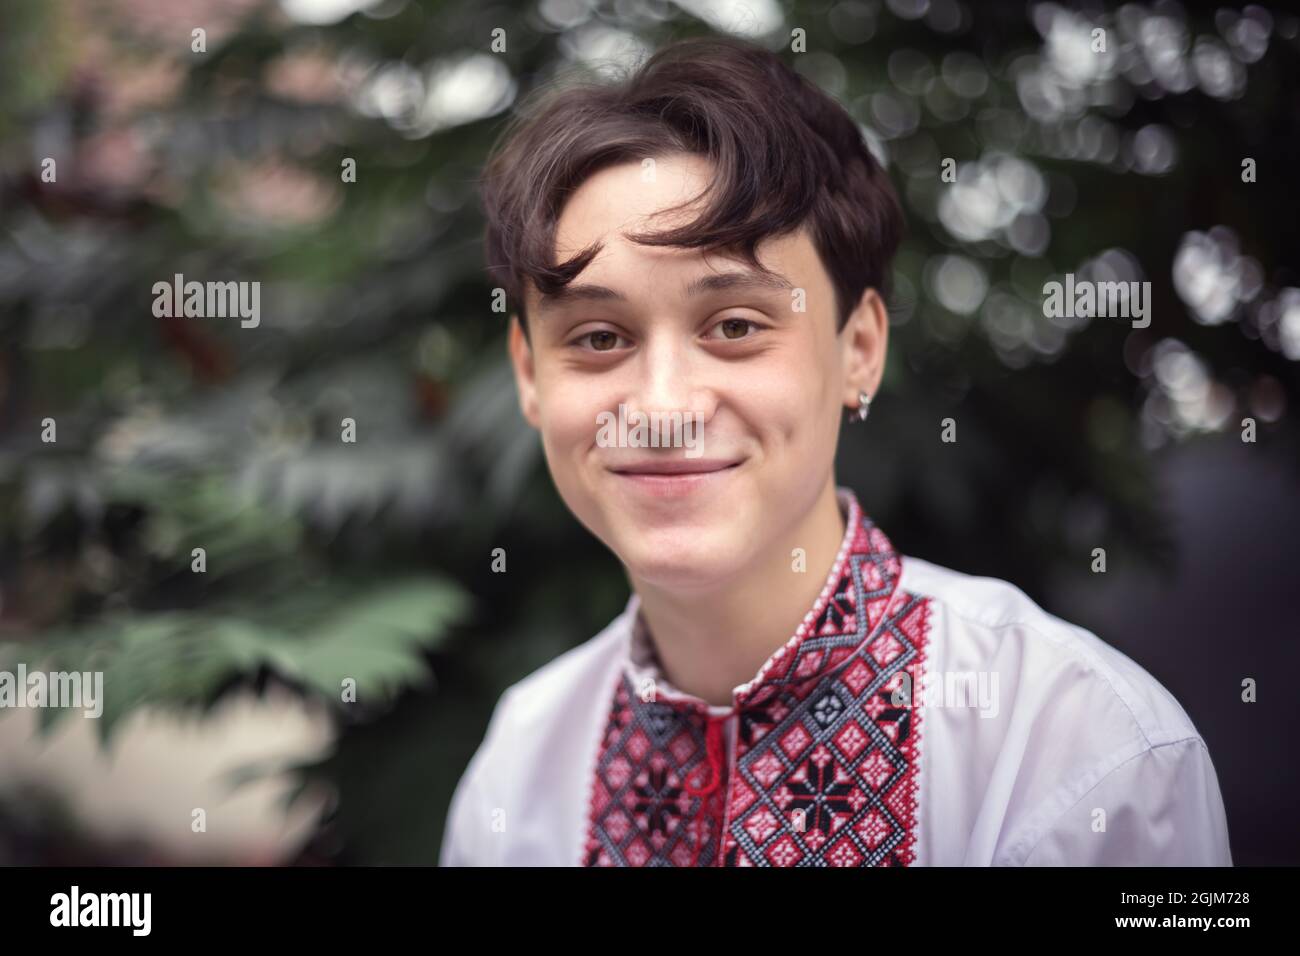 Portrait of young smiling teen boy in a traditional Ukrainian shirt (embroidered shirt). Ukraine people Stock Photo